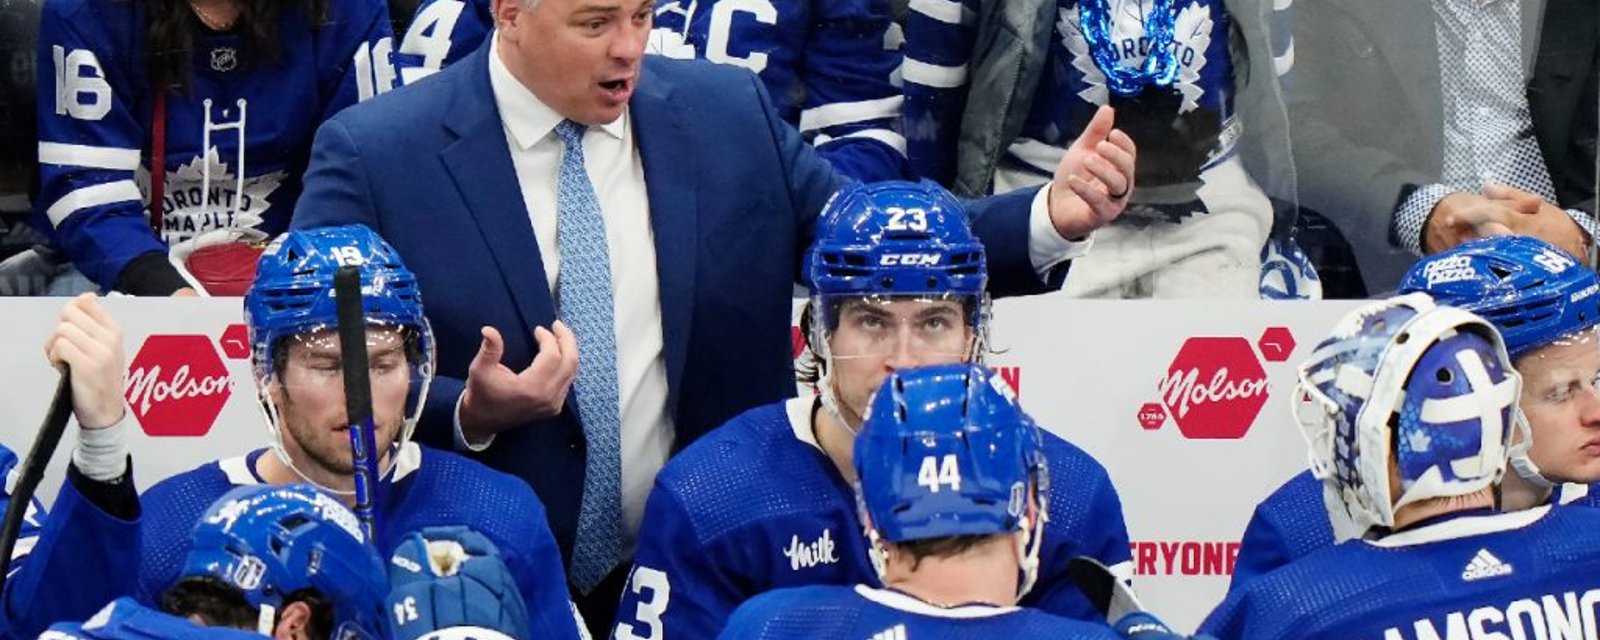 Sheldon Keefe to be targeted by rival team as soon as Leafs get eliminated!